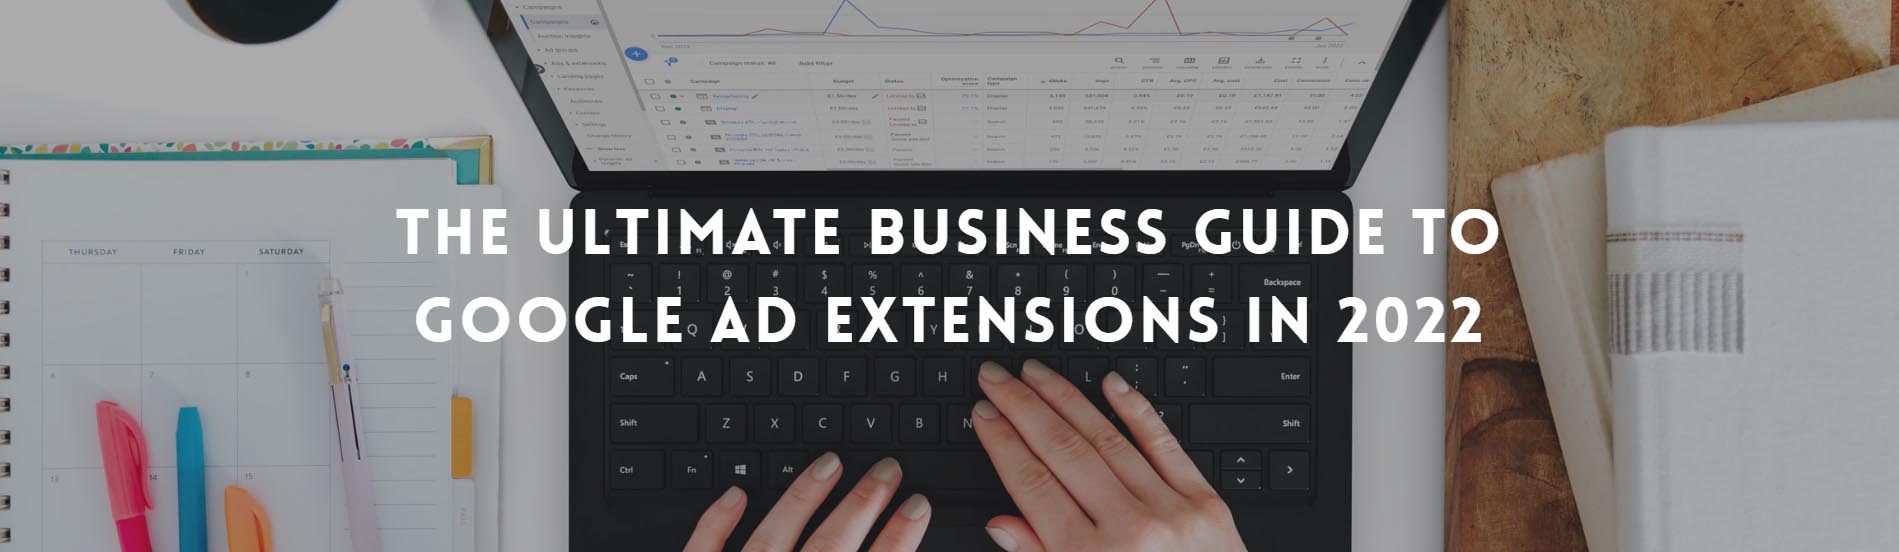 The Ultimate Business Guide To Google Ad Extensions In 2022